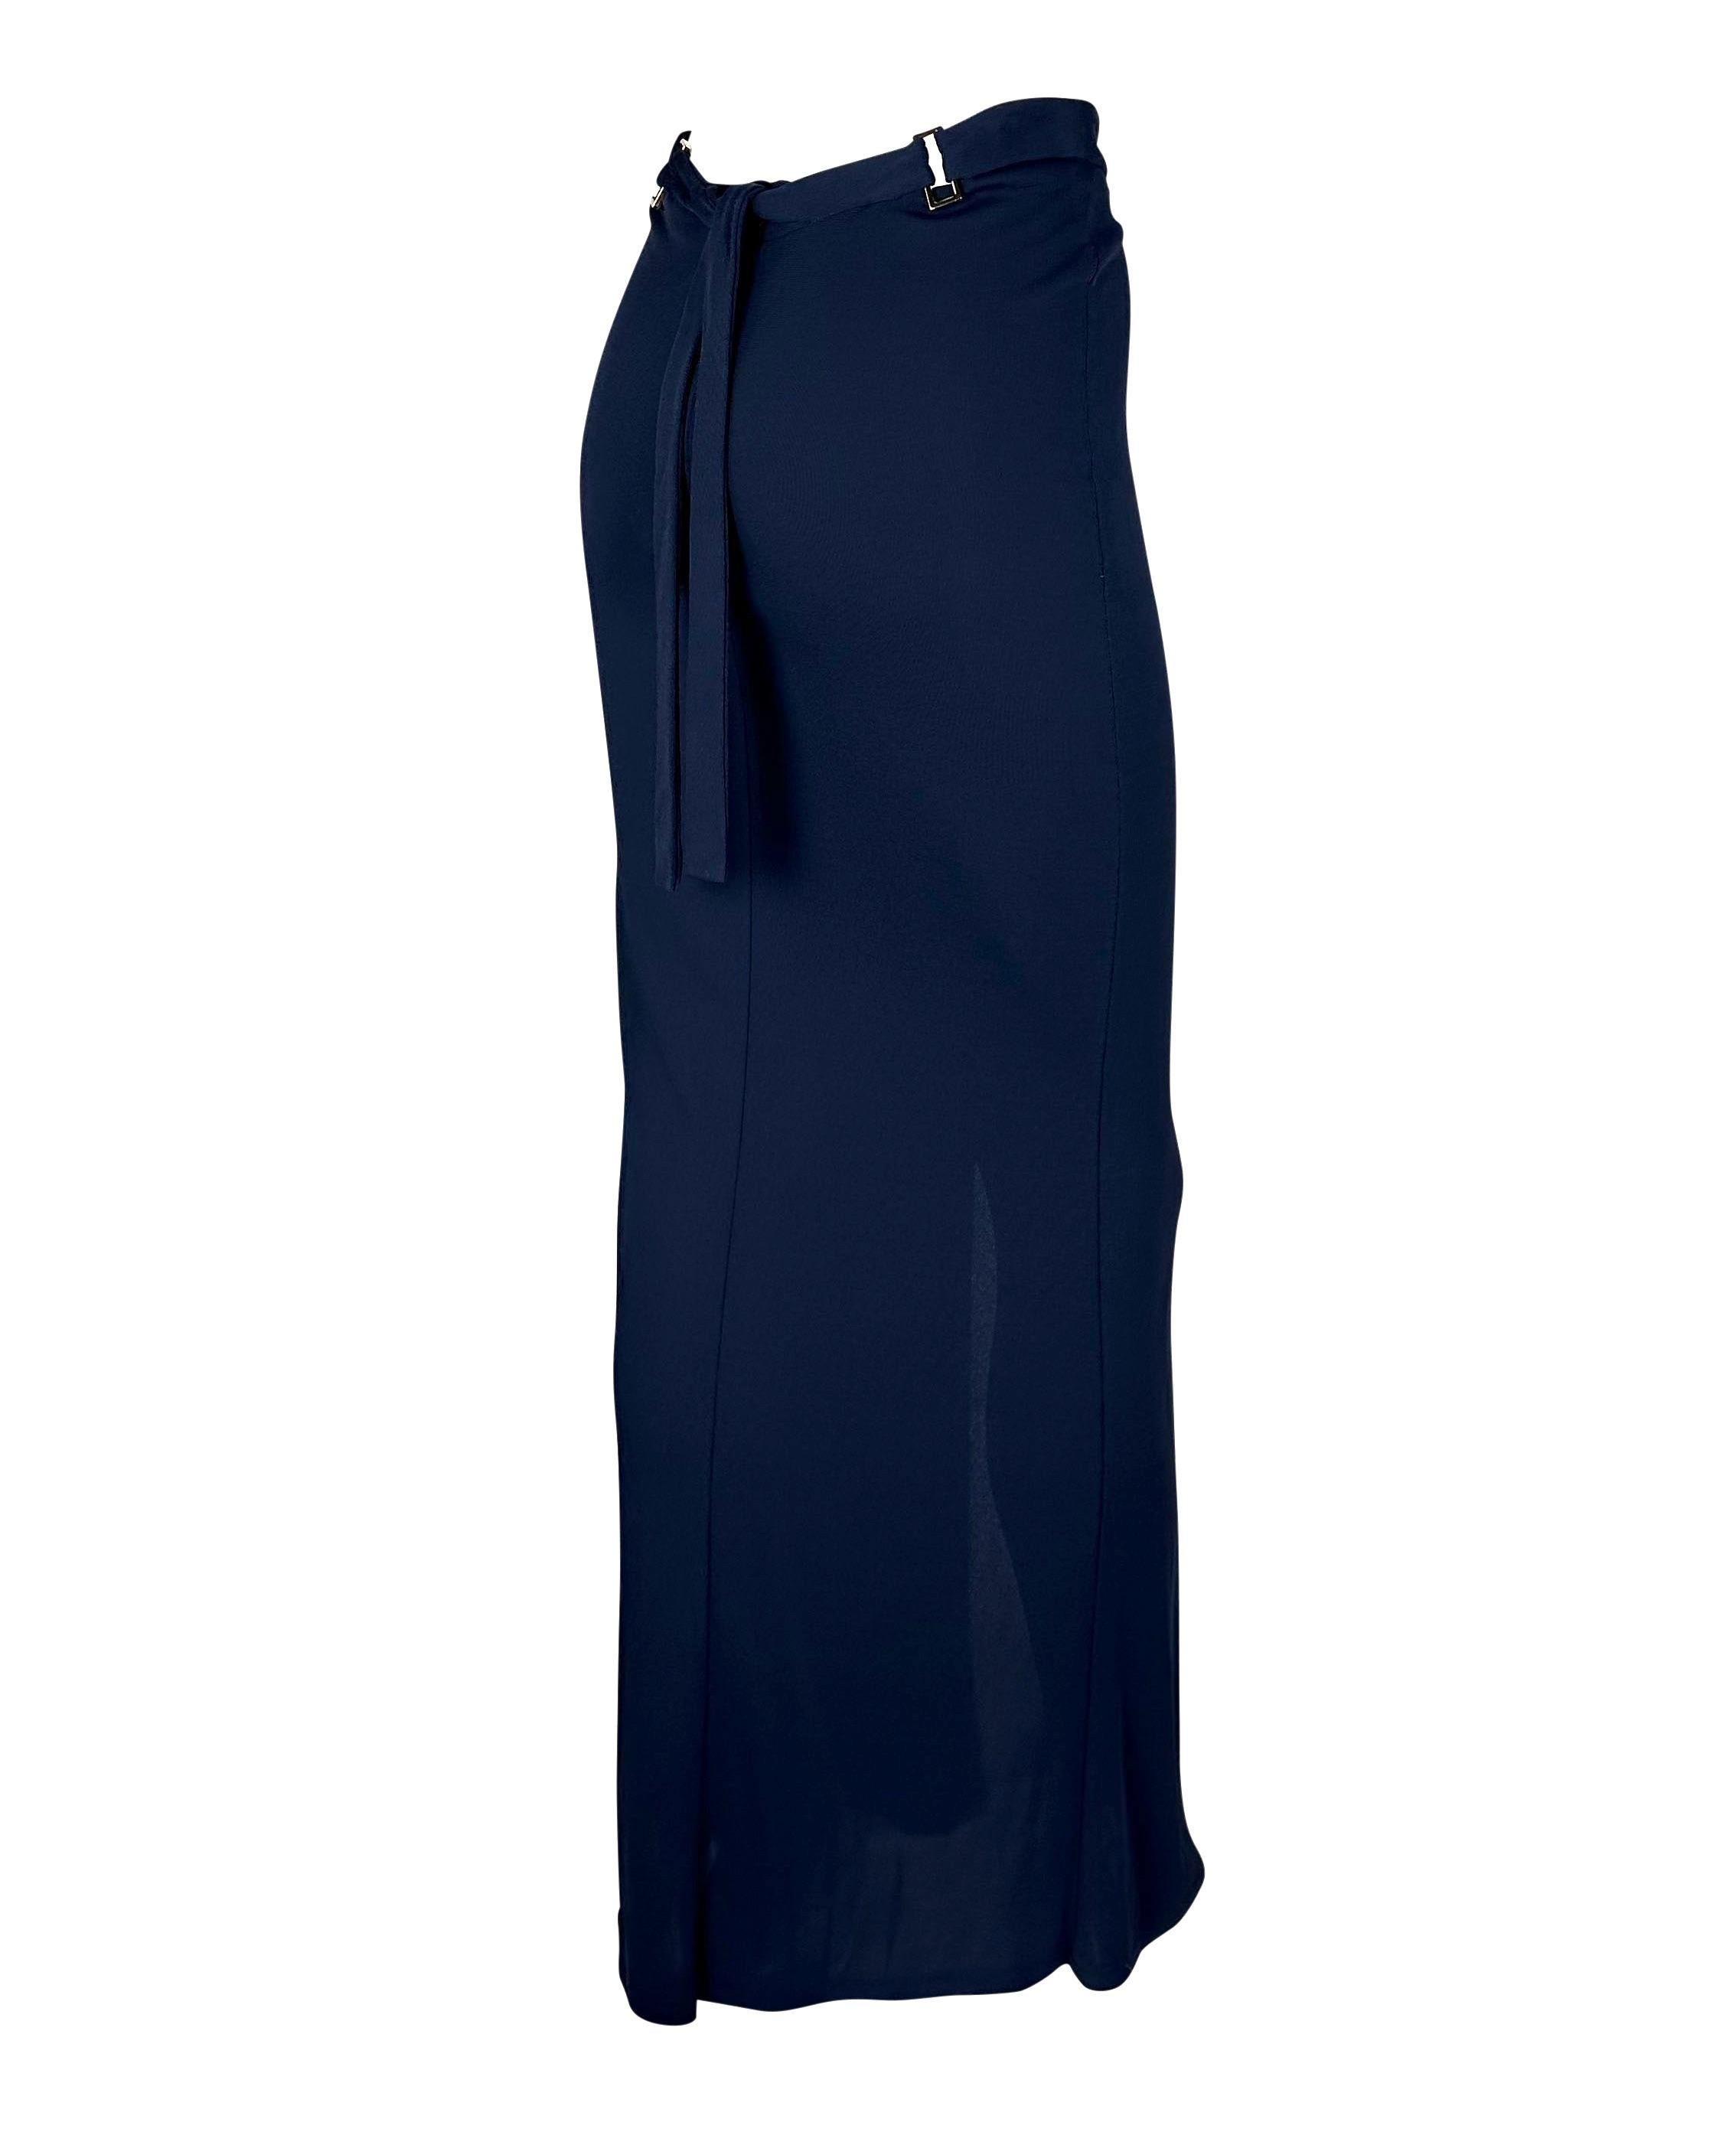 S/S 1997 Gucci by Tom Ford Navy Maxi Slit Buckle Tie Skirt Sample  For Sale 3